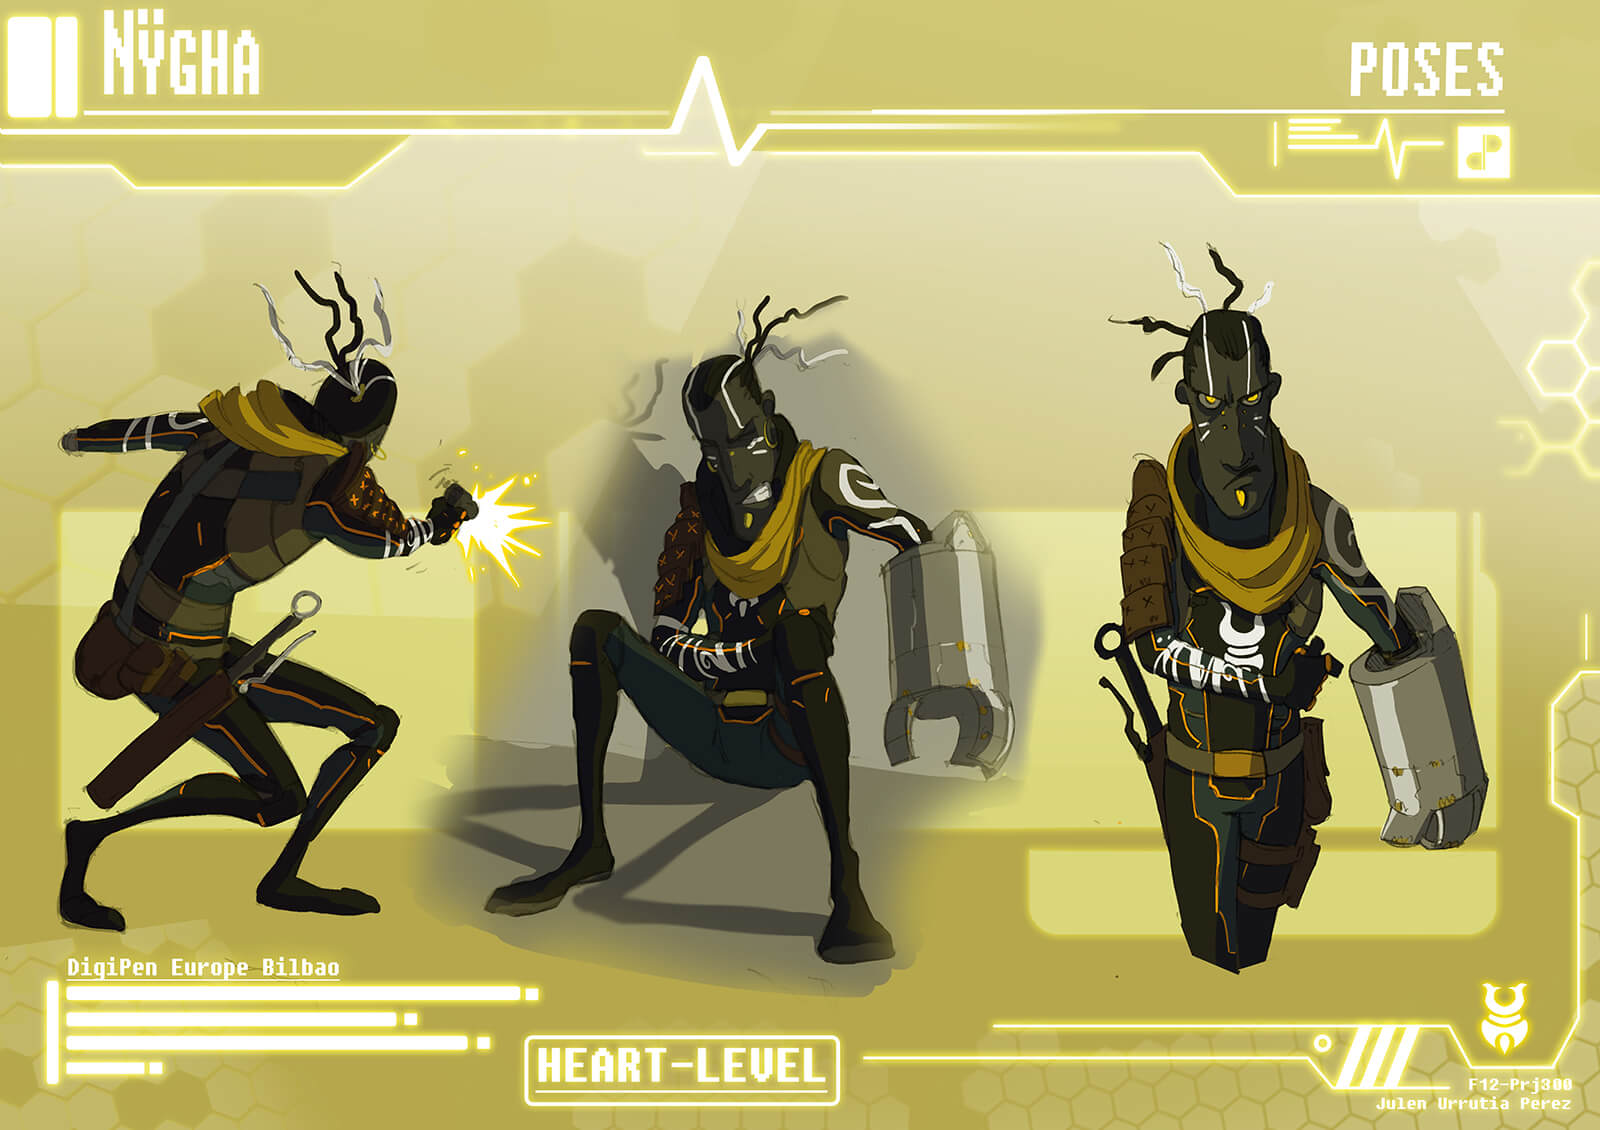 Concept paintings of main character Nygha&#039;s various poses